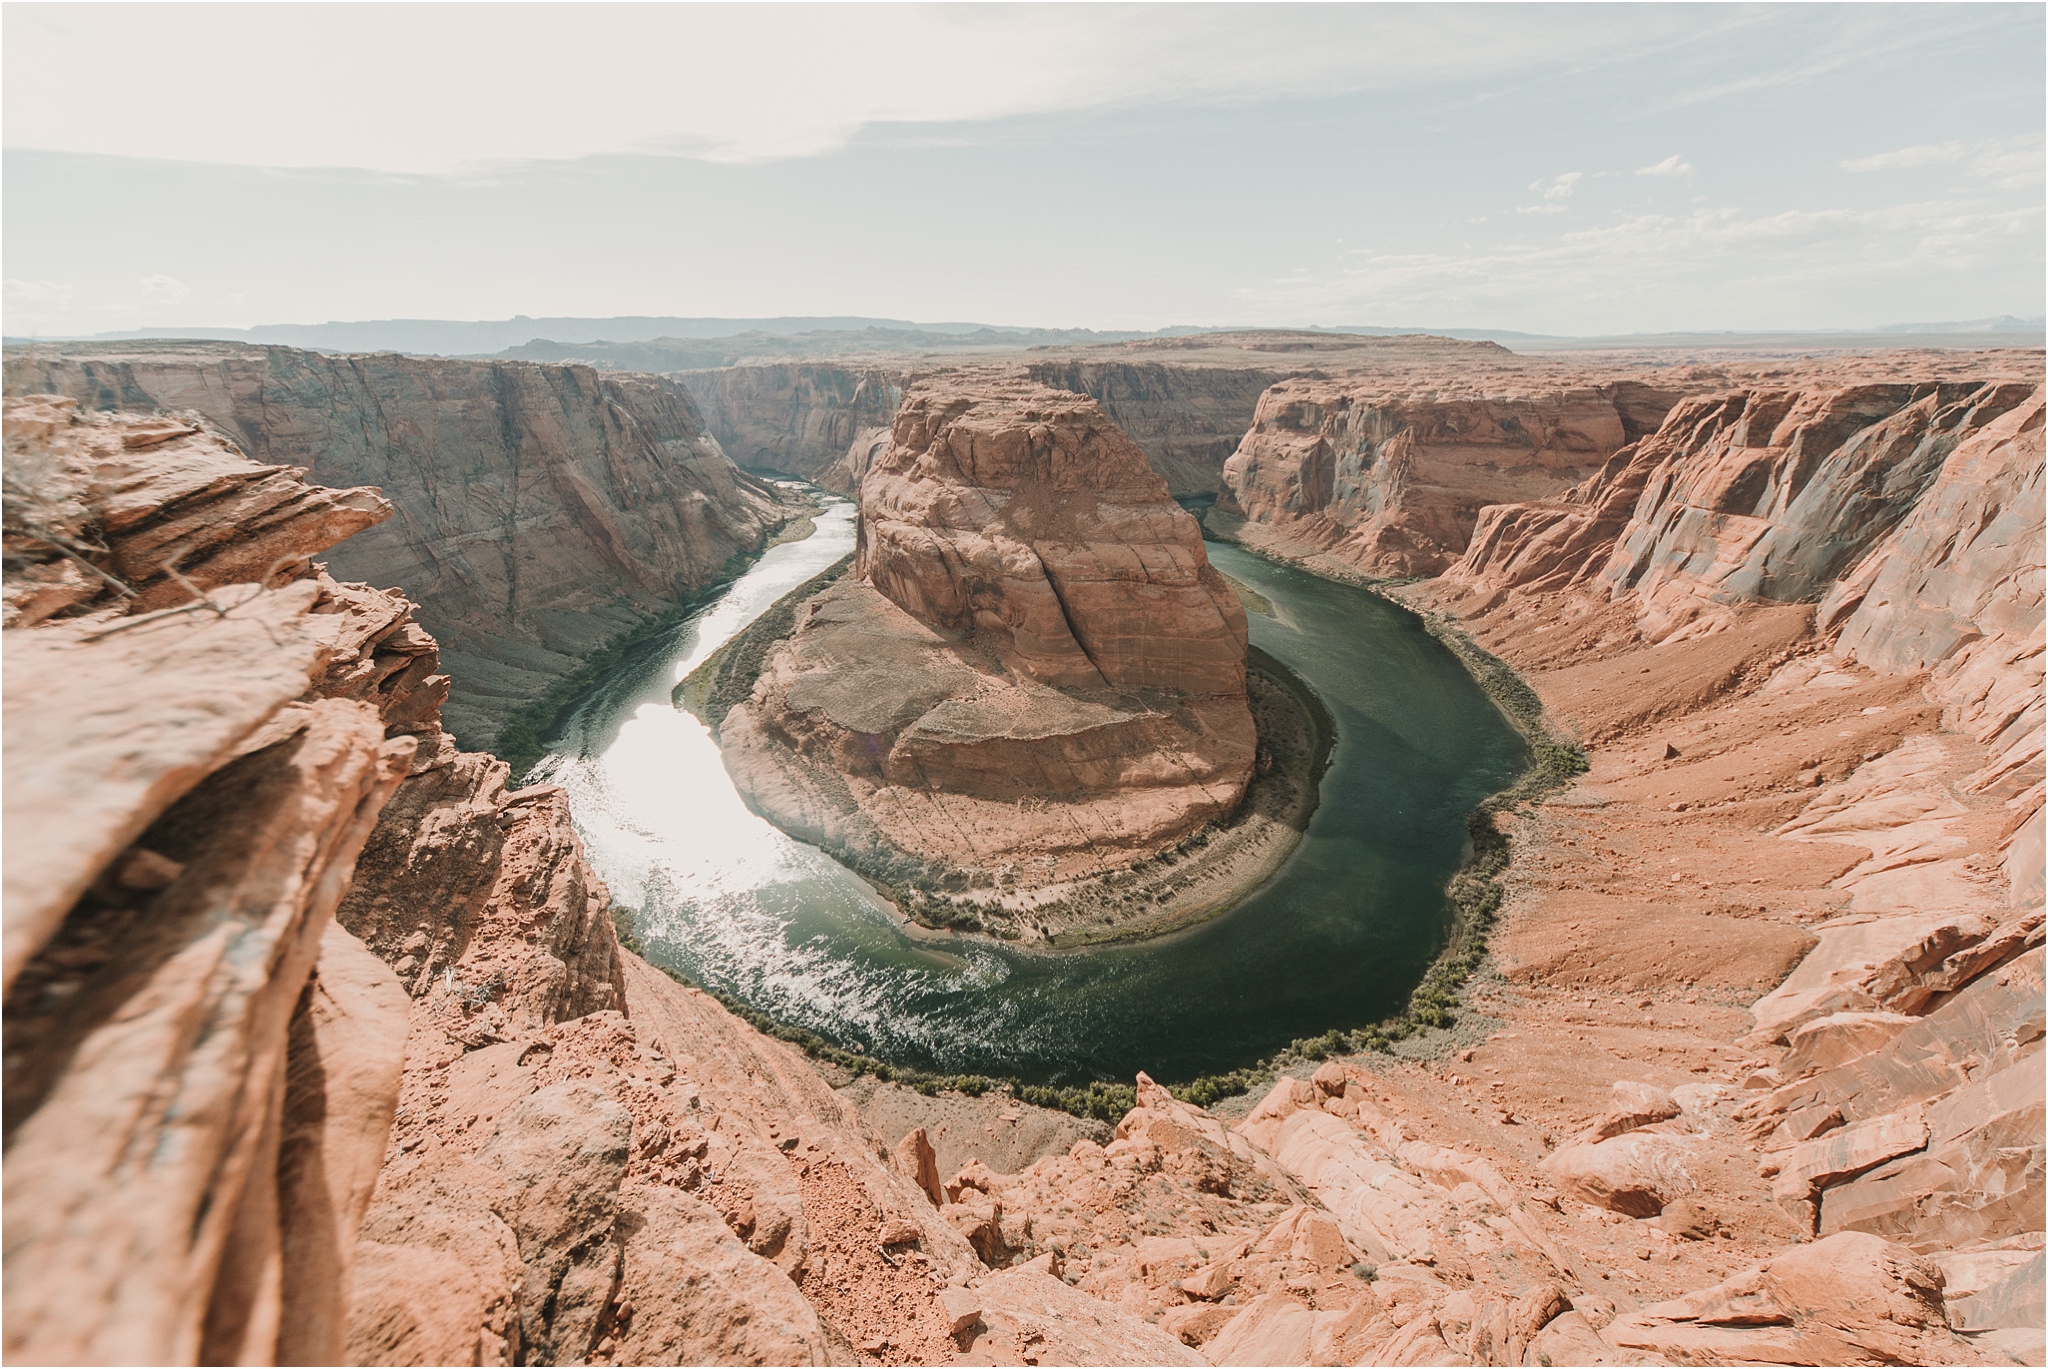 Epic Antelope Canyon and Horseshoe Bend Engagement Photos by Tucson Wedding Photographer Anh and Bryan | West End Photography